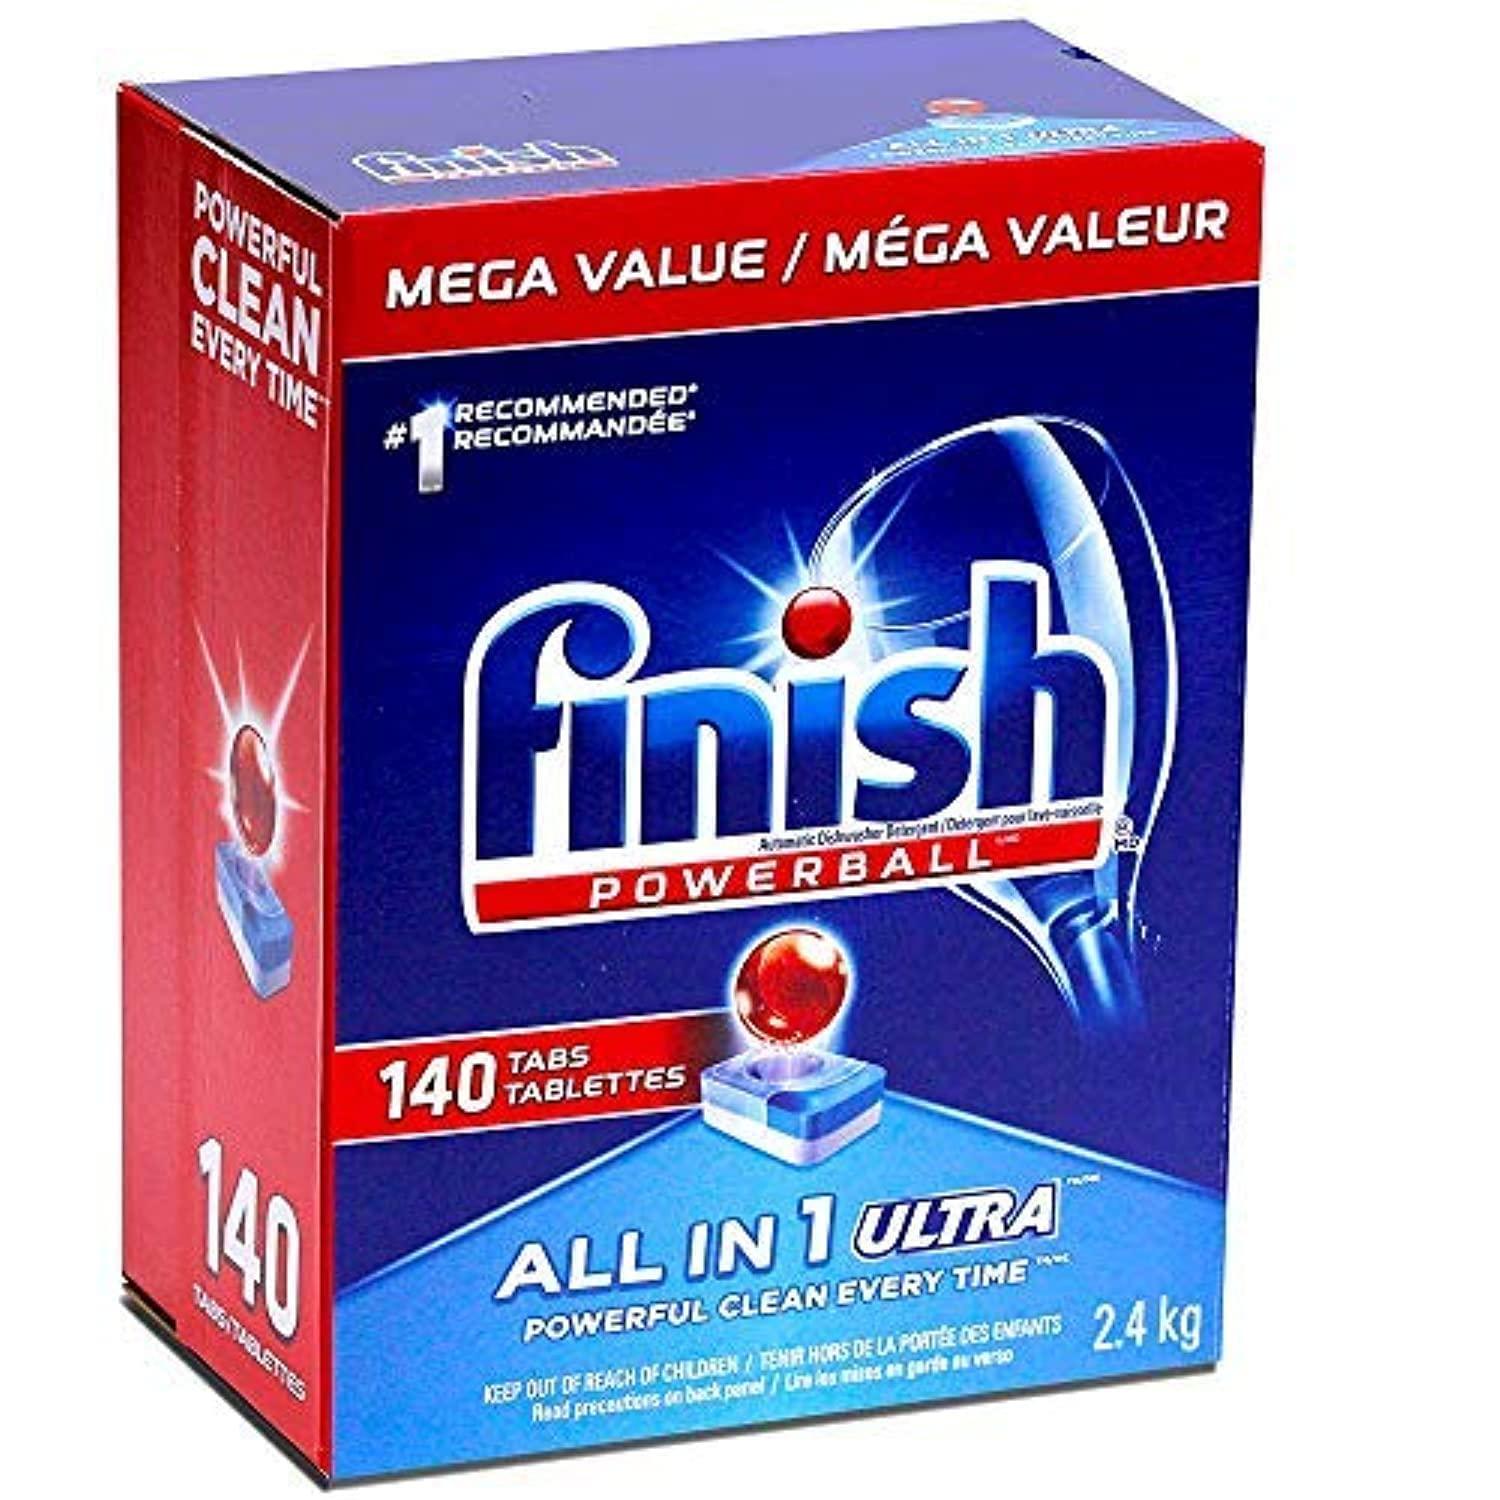 finish powerball, finish powerball Suppliers and Manufacturers at